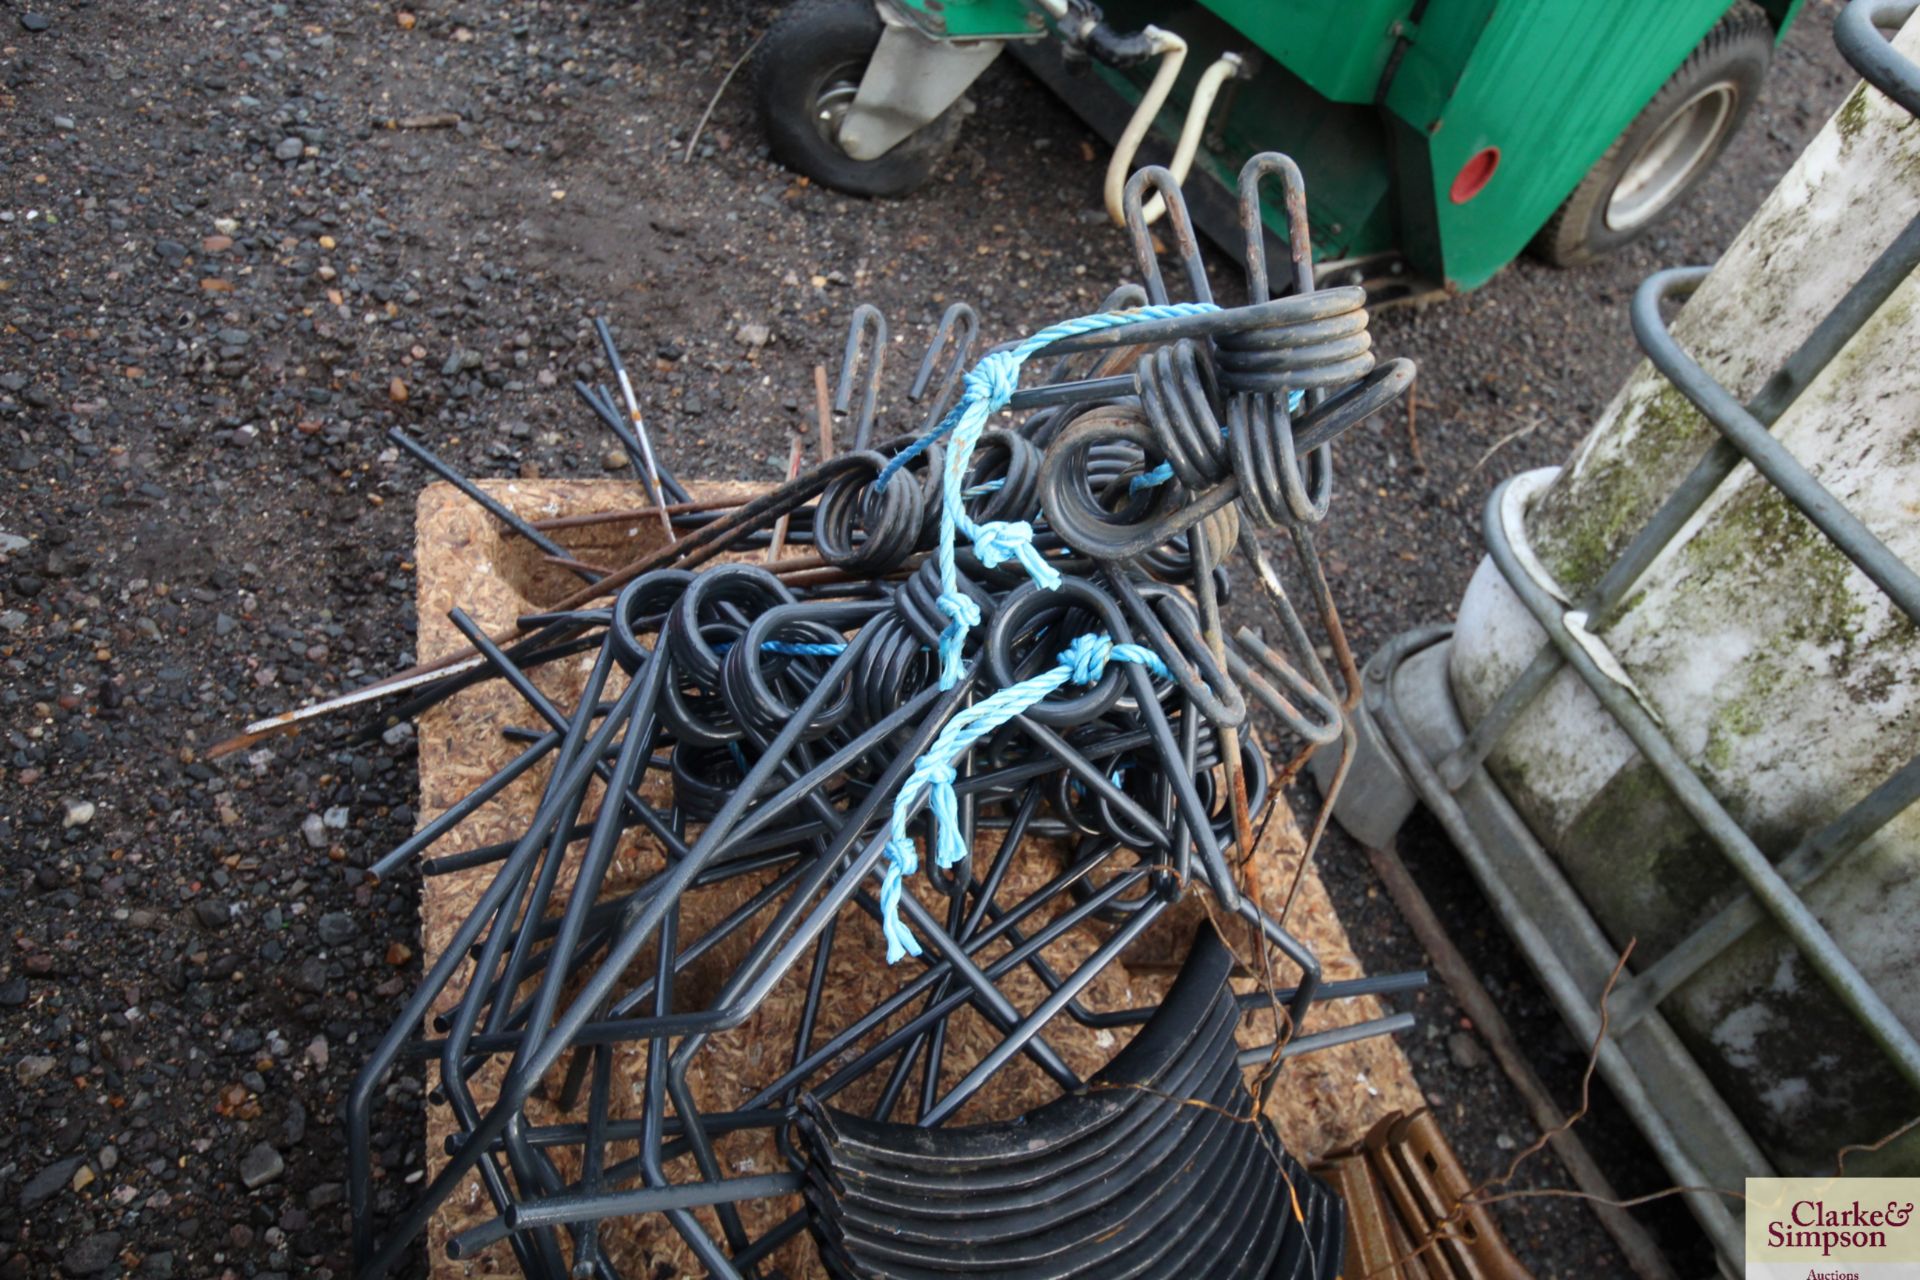 Quantity of spares for Kverneland drill. For sale due to farming by contract. V - Image 3 of 3